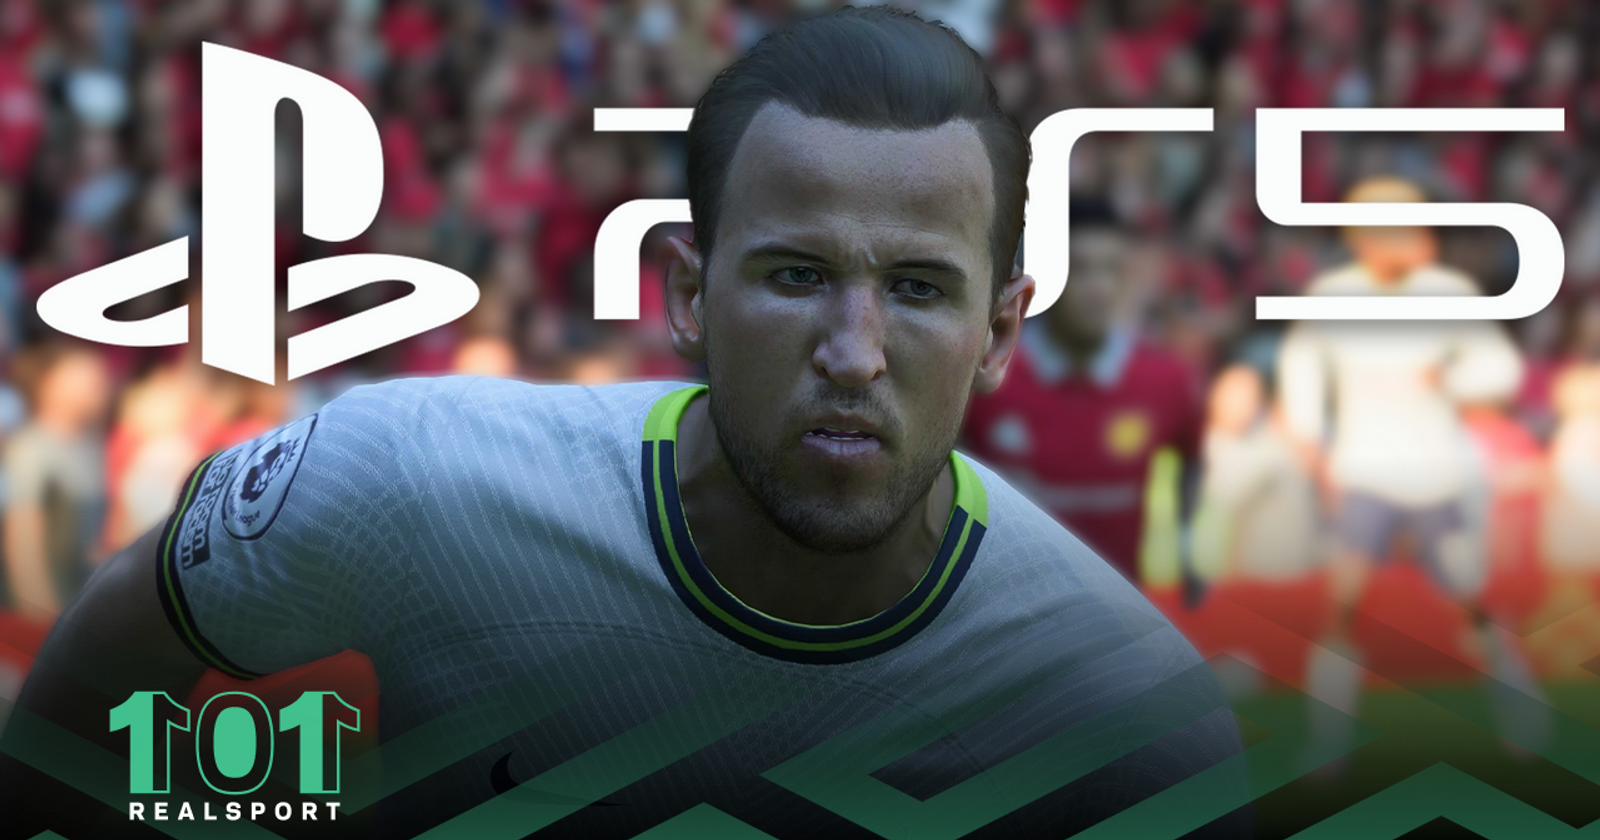 Everything you need to know about FIFA 22 PC - New features, price